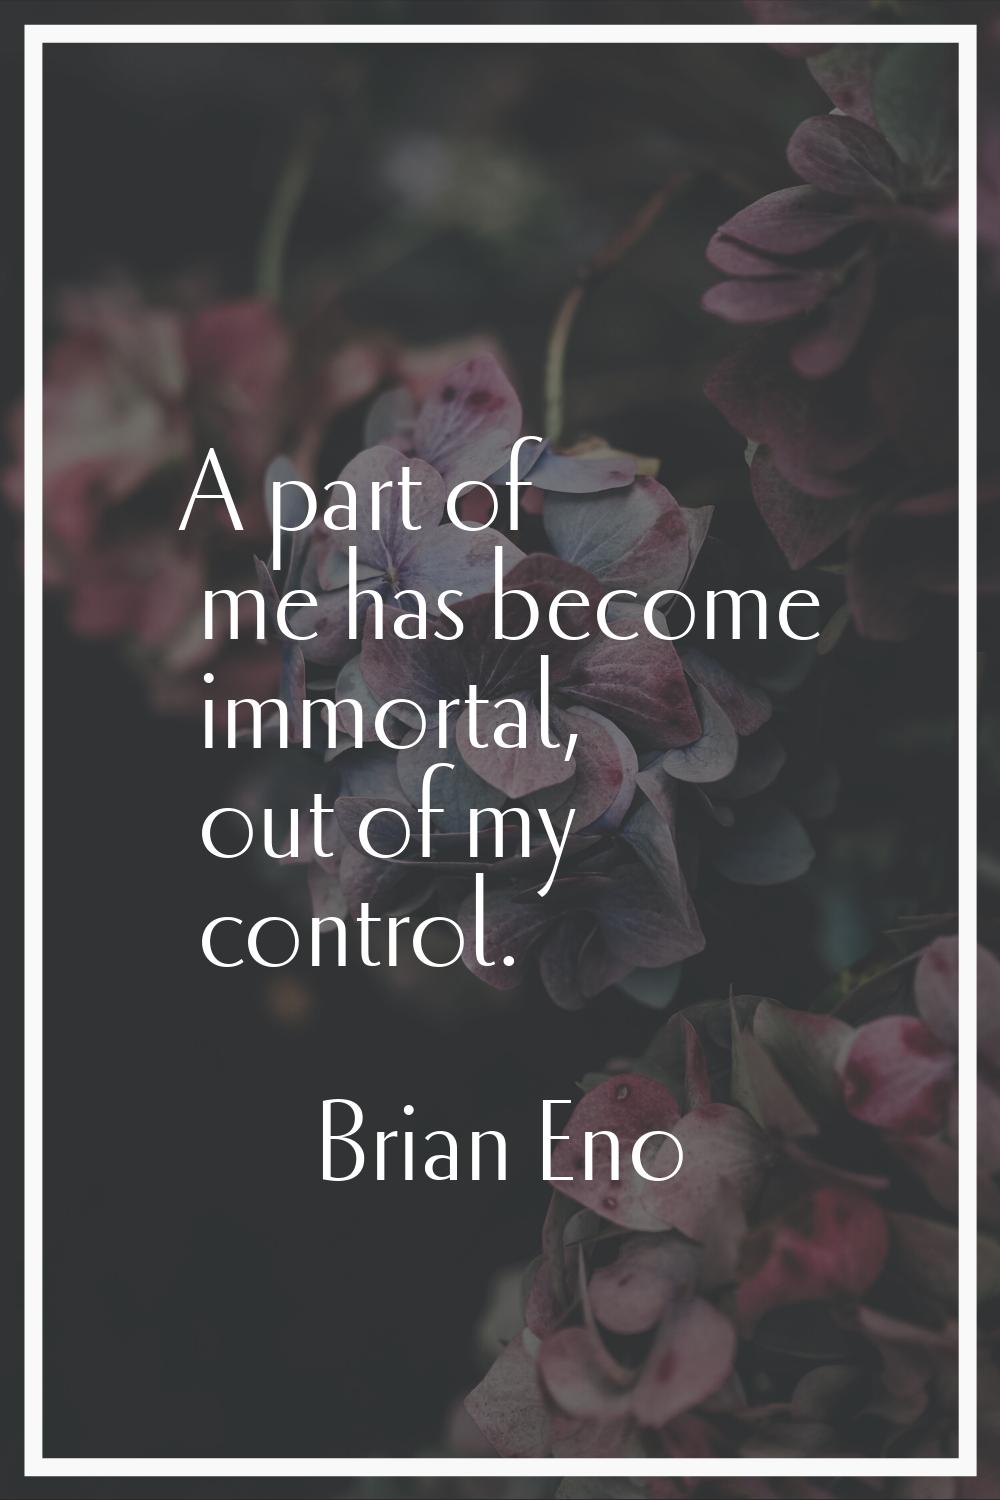 A part of me has become immortal, out of my control.